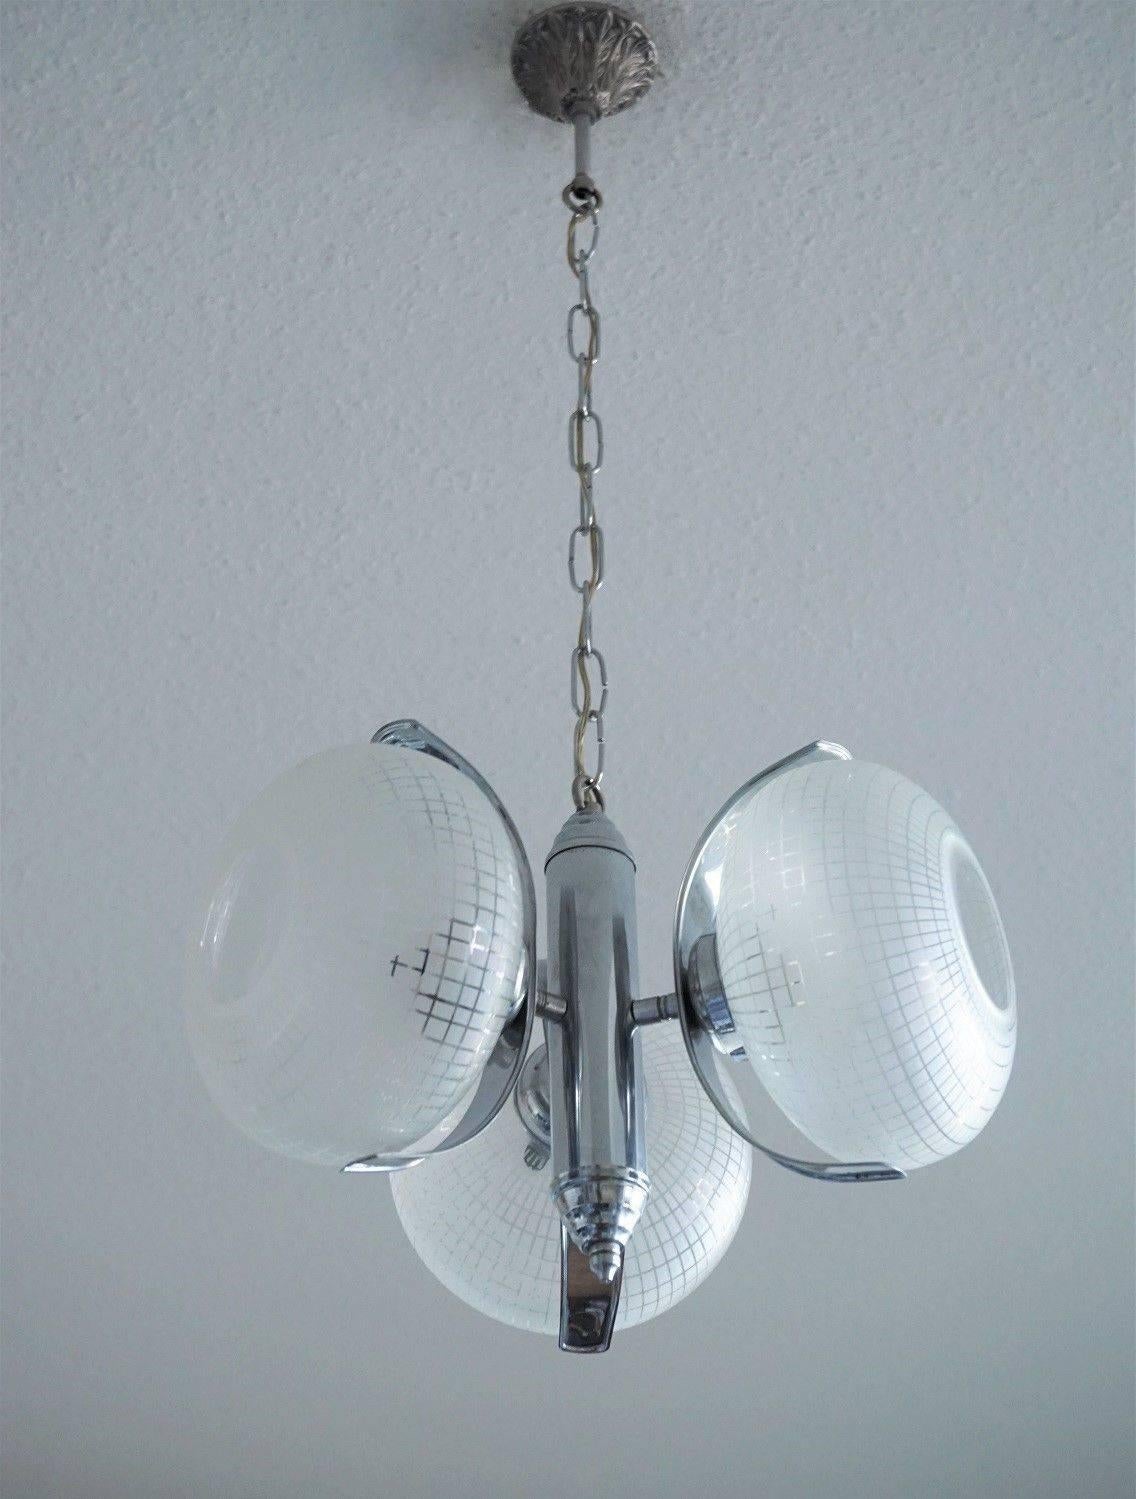 Space Age chrome-plated metal three-light chandelier with large frosted glass globes, Germany, circa 1960

Measures: Diameter 15.75 in (40 cm) 
Height 29.50 in (75 cm)

Three light sockets.